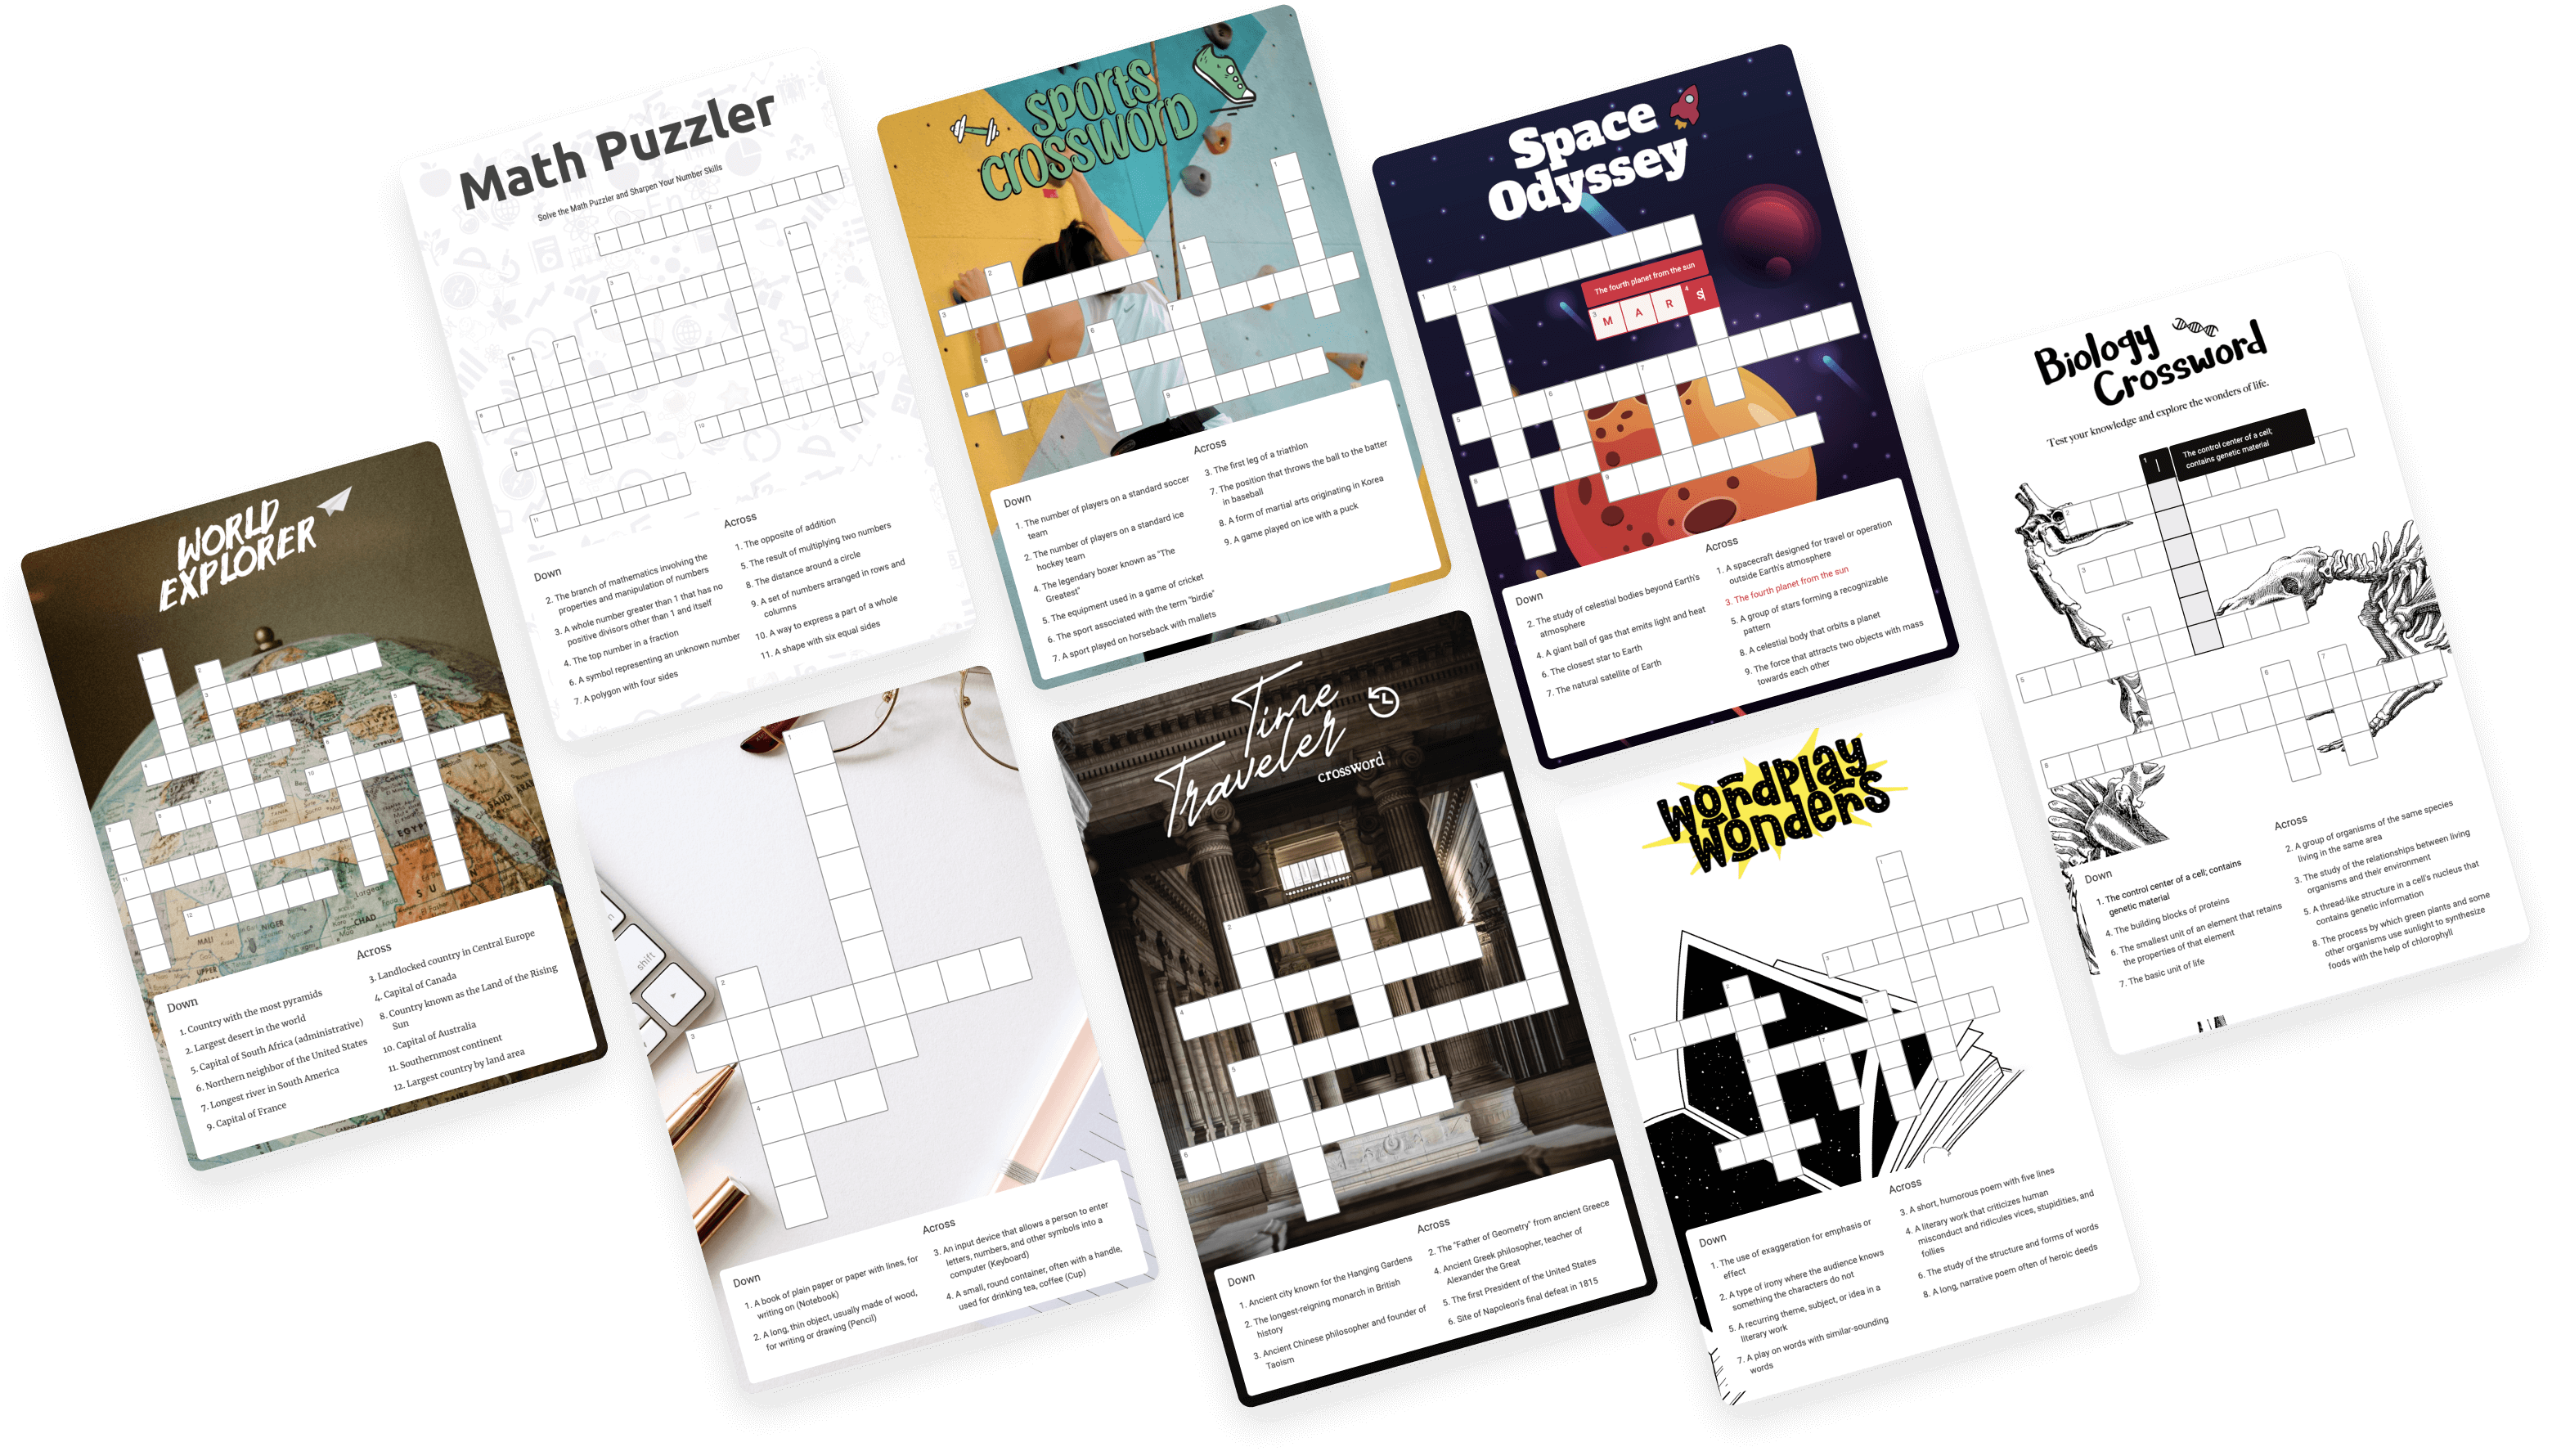 Posters with Interacty projects based on mechanics "Kreuzworträtsel"